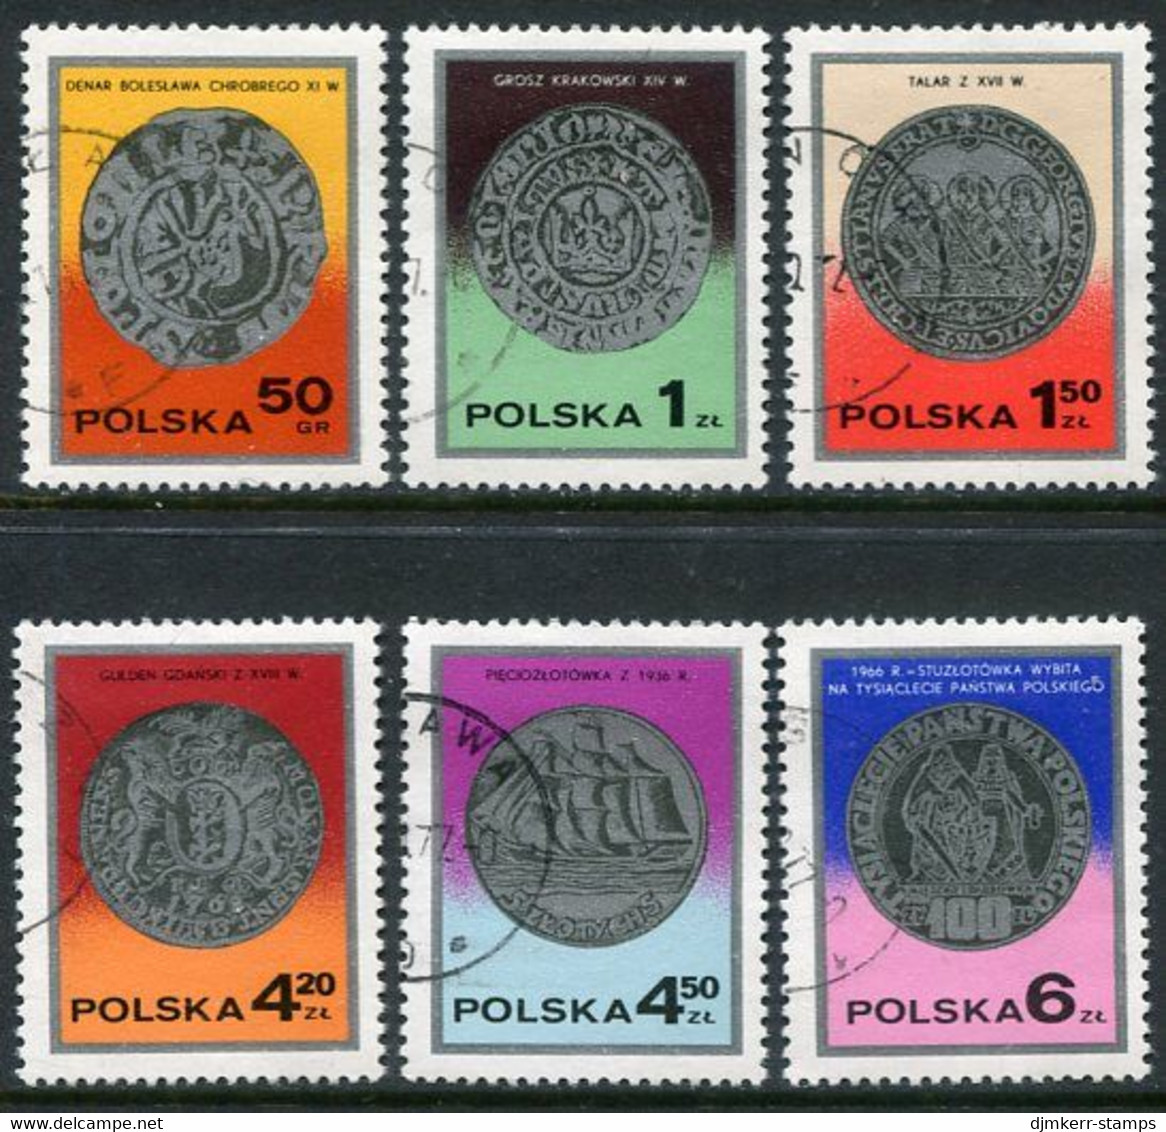 POLAND 1977 Stamp Day: Coins Used.  Michel 2525-30 - Used Stamps